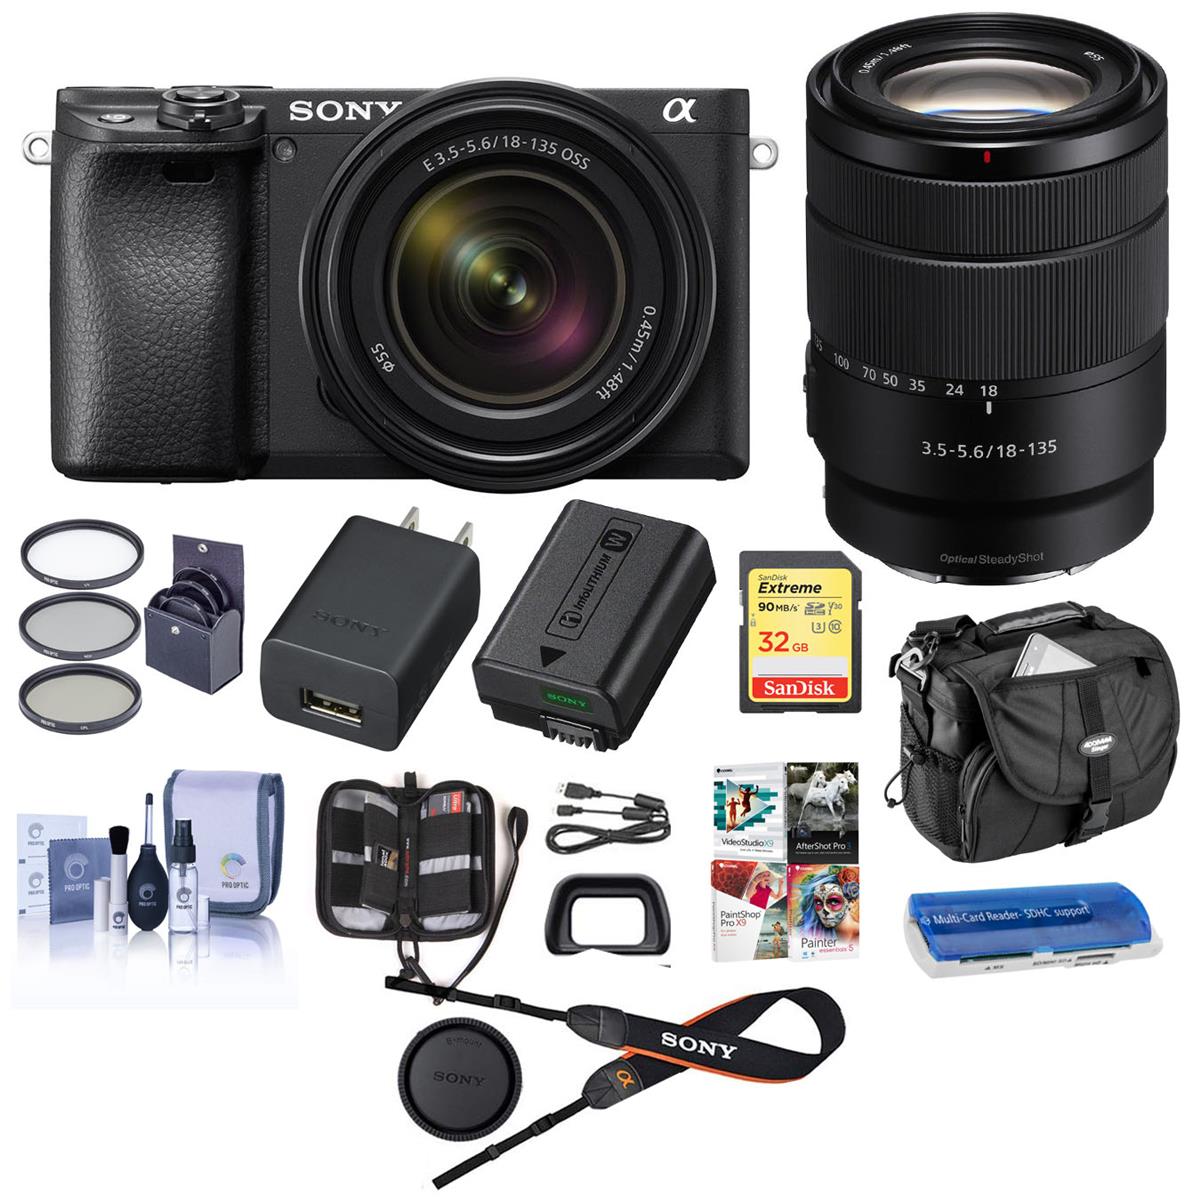 Sony Alpha a6400 Mirrorless Camera with 18-135mm f/3.5-5.6 Lens W/Free ACC Kit